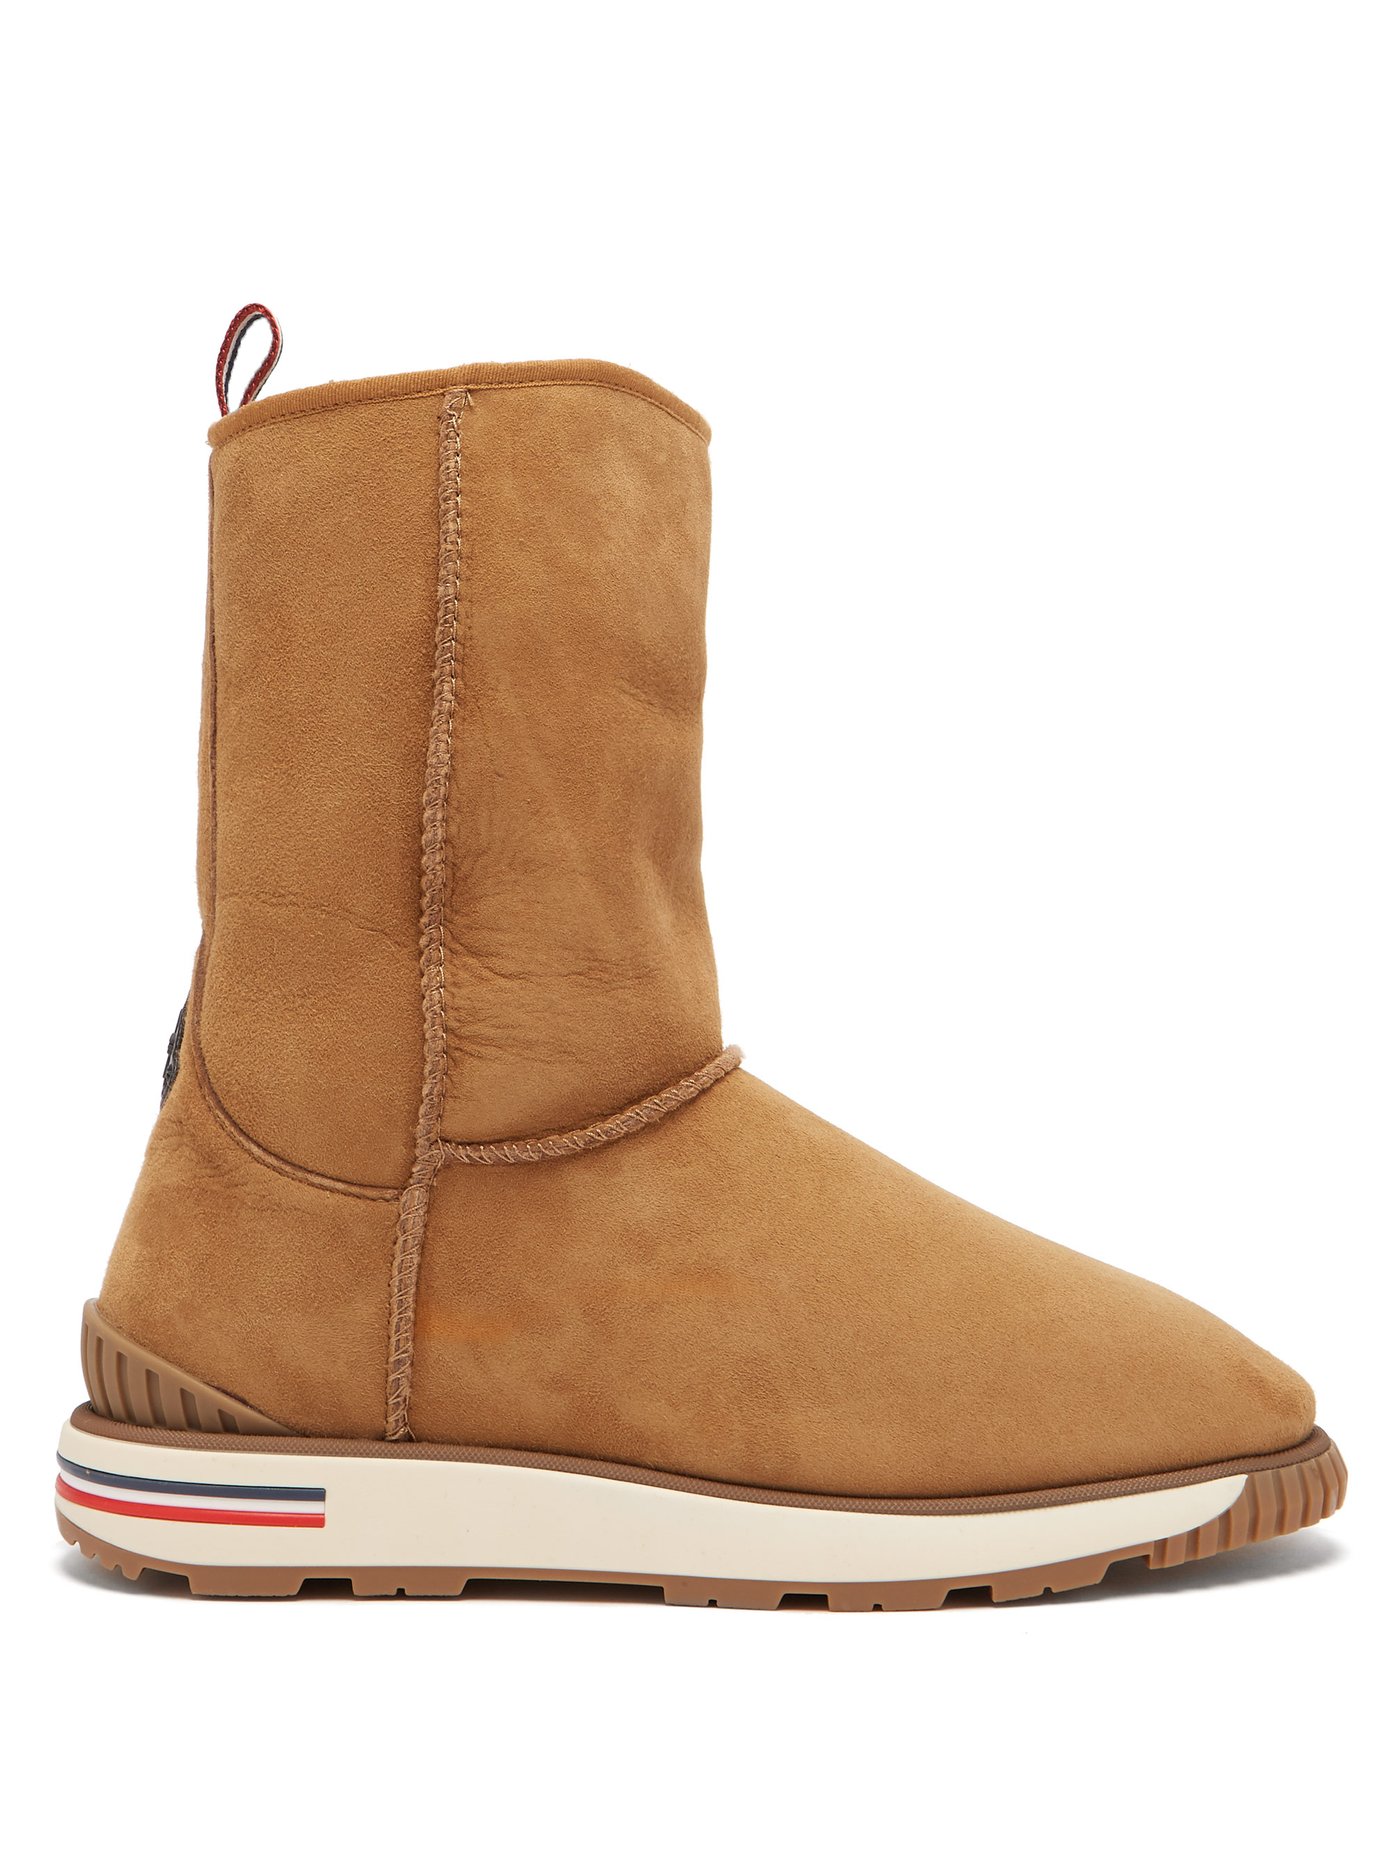 shearling lined boots uk